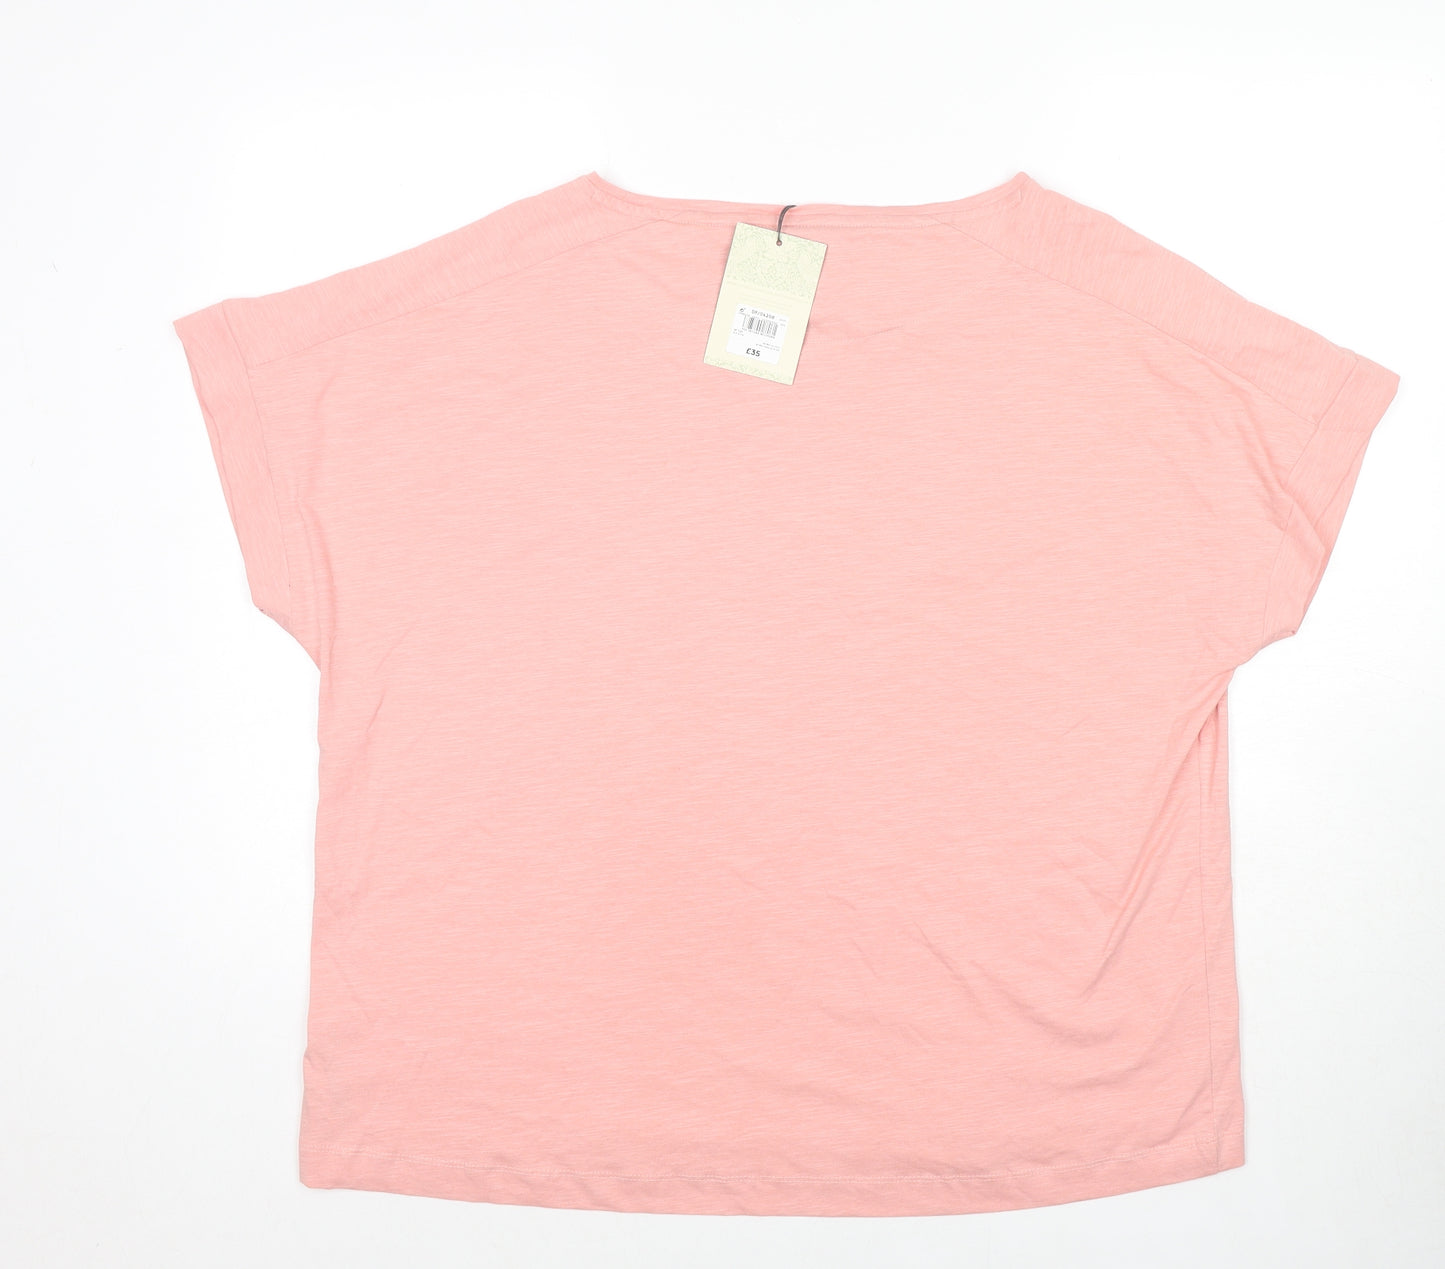 NEXT Womens Pink Cotton Basic T-Shirt Size M Round Neck - Love Is Enough William Morris & Co.